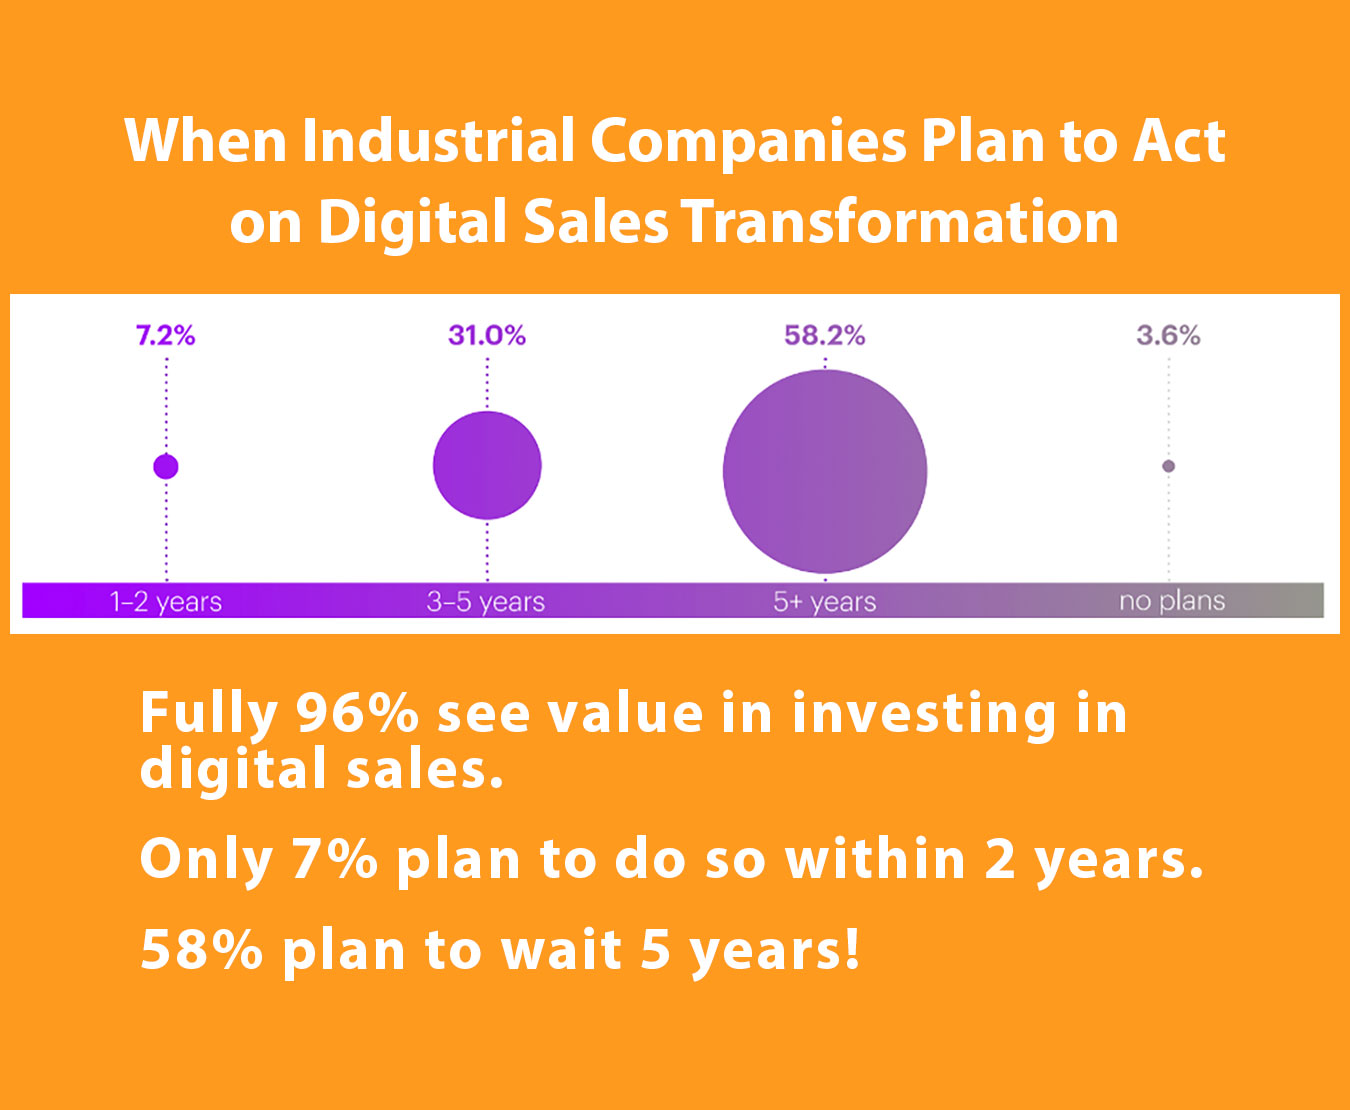 mastering digital sales transformation is a goal industrial companies hold but they don't plan to invest very quickly. Most (58%) plan to wait 5 years. Only 7% plan to transition to digital sales within 2 years.